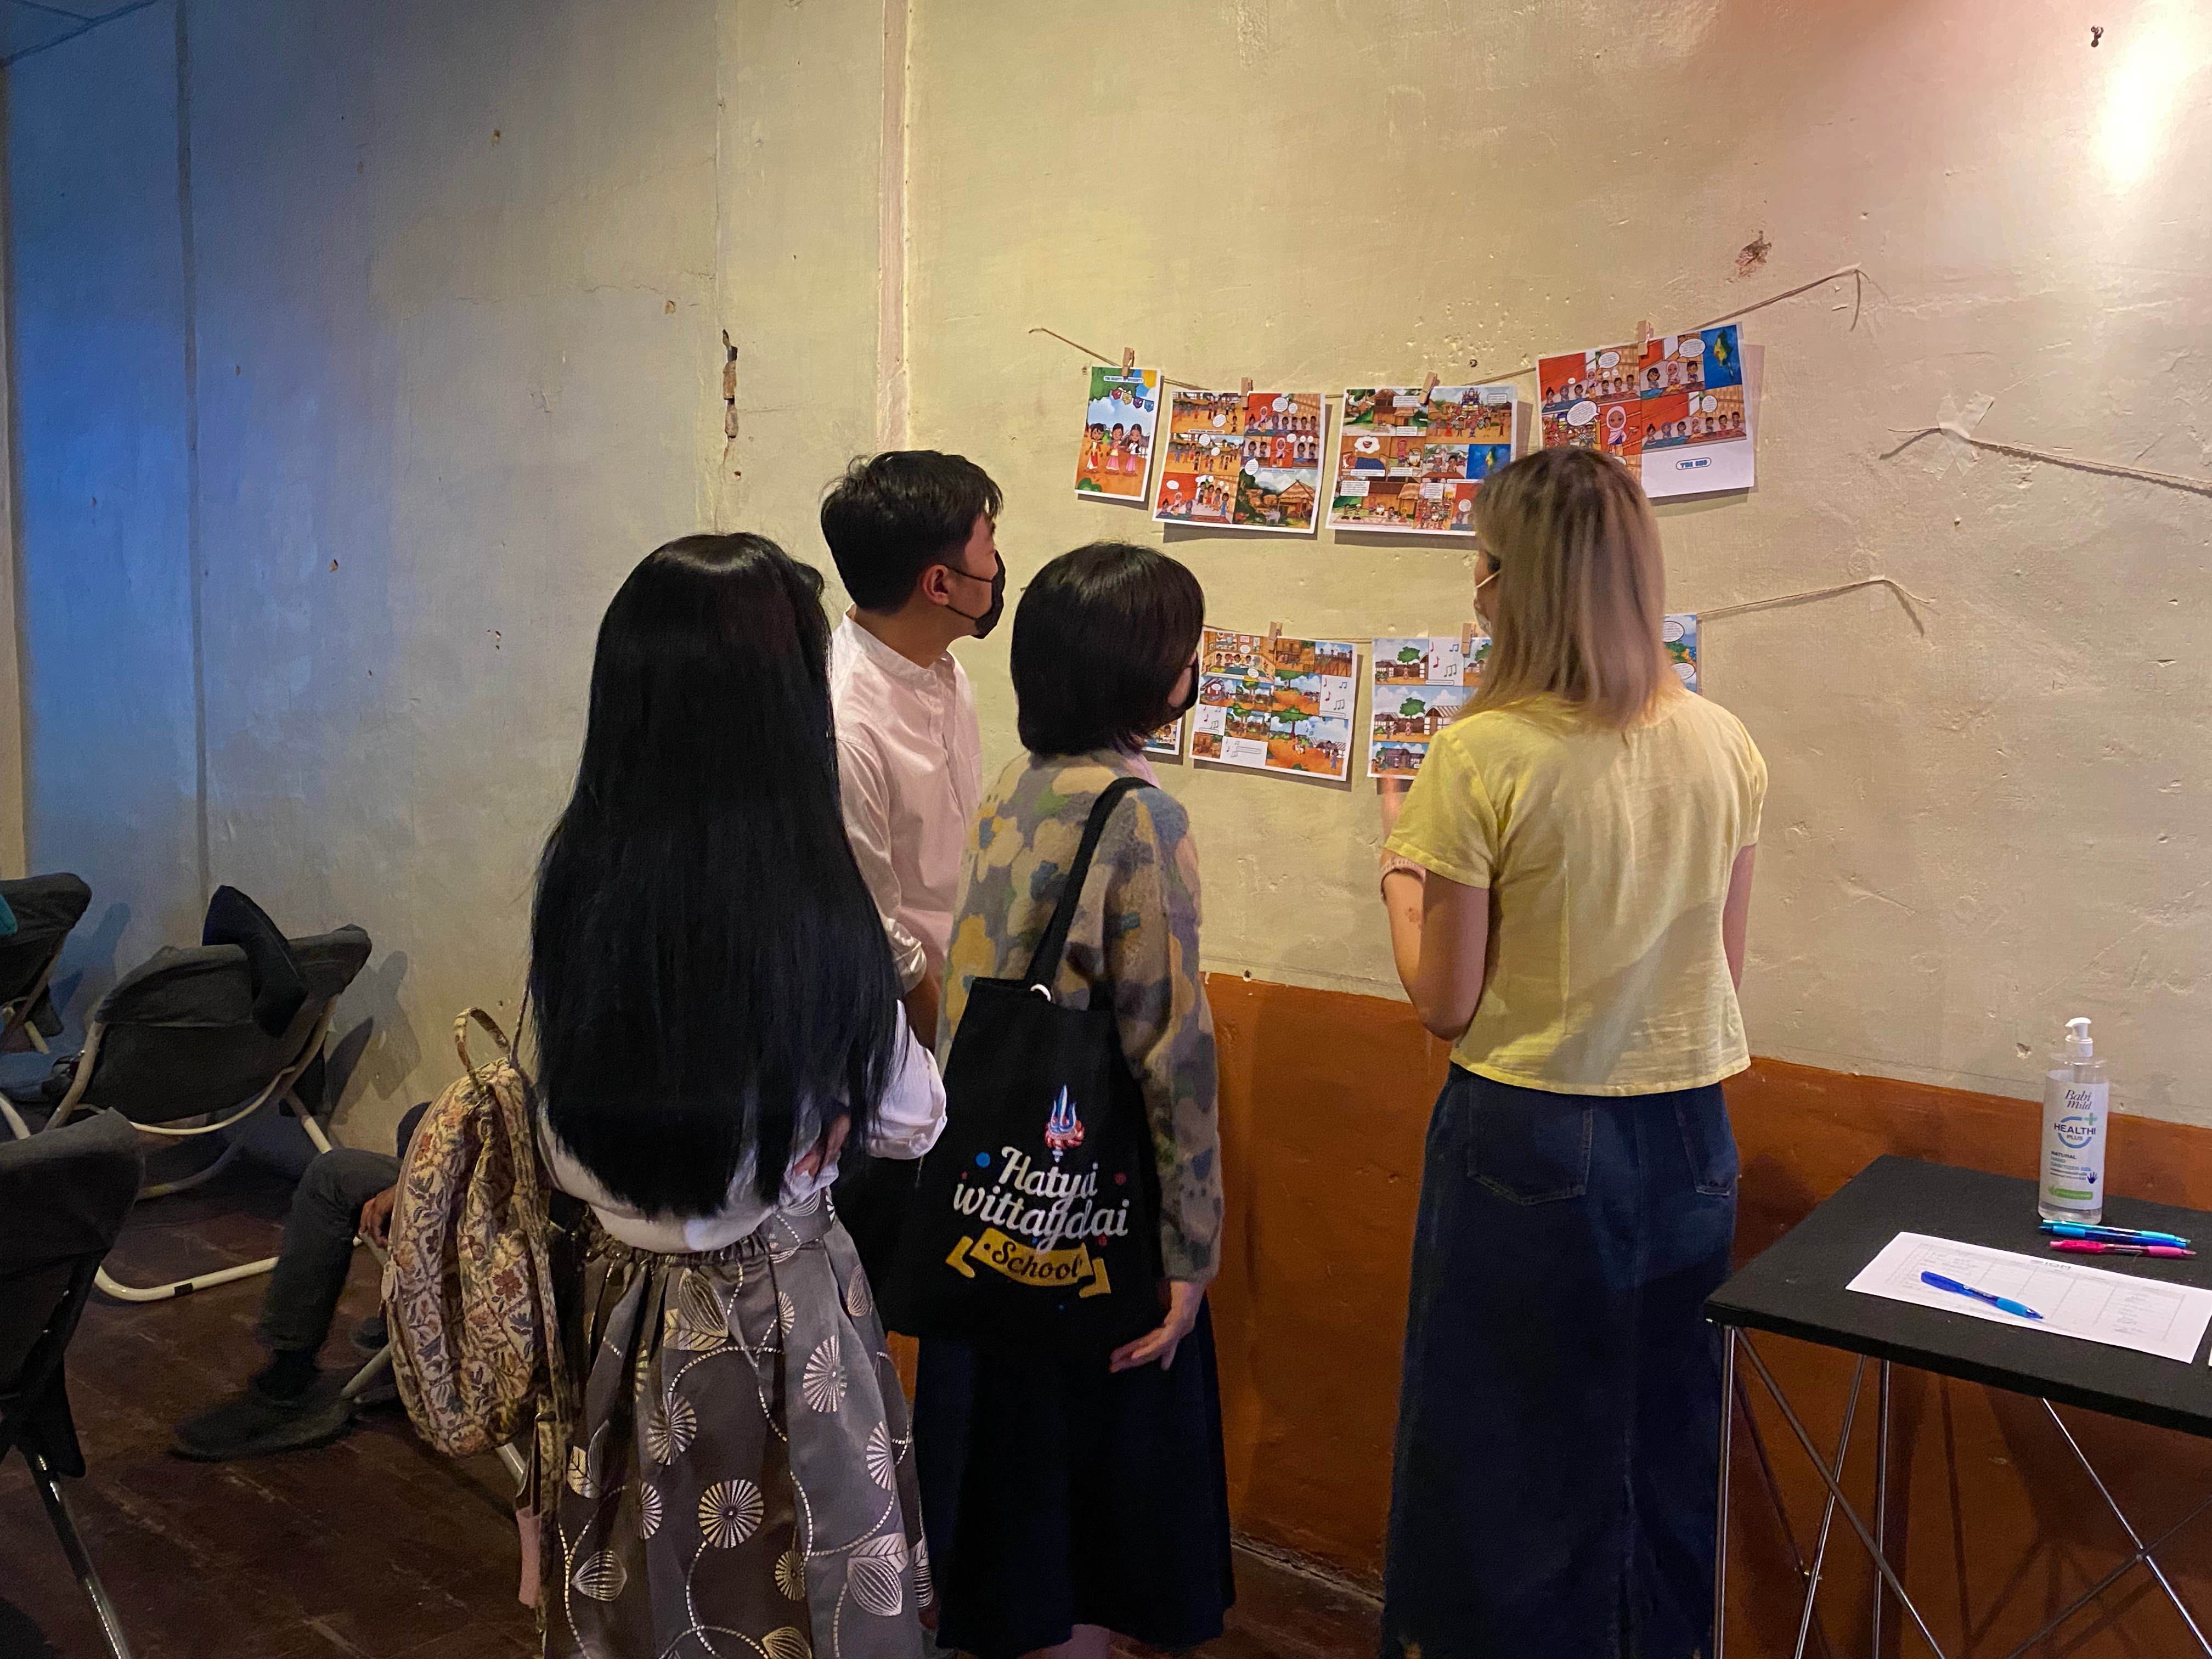 Attendees going through the exhibited Rohingya cultural heritage during Film Launch in Hat Yai, Songkhla.